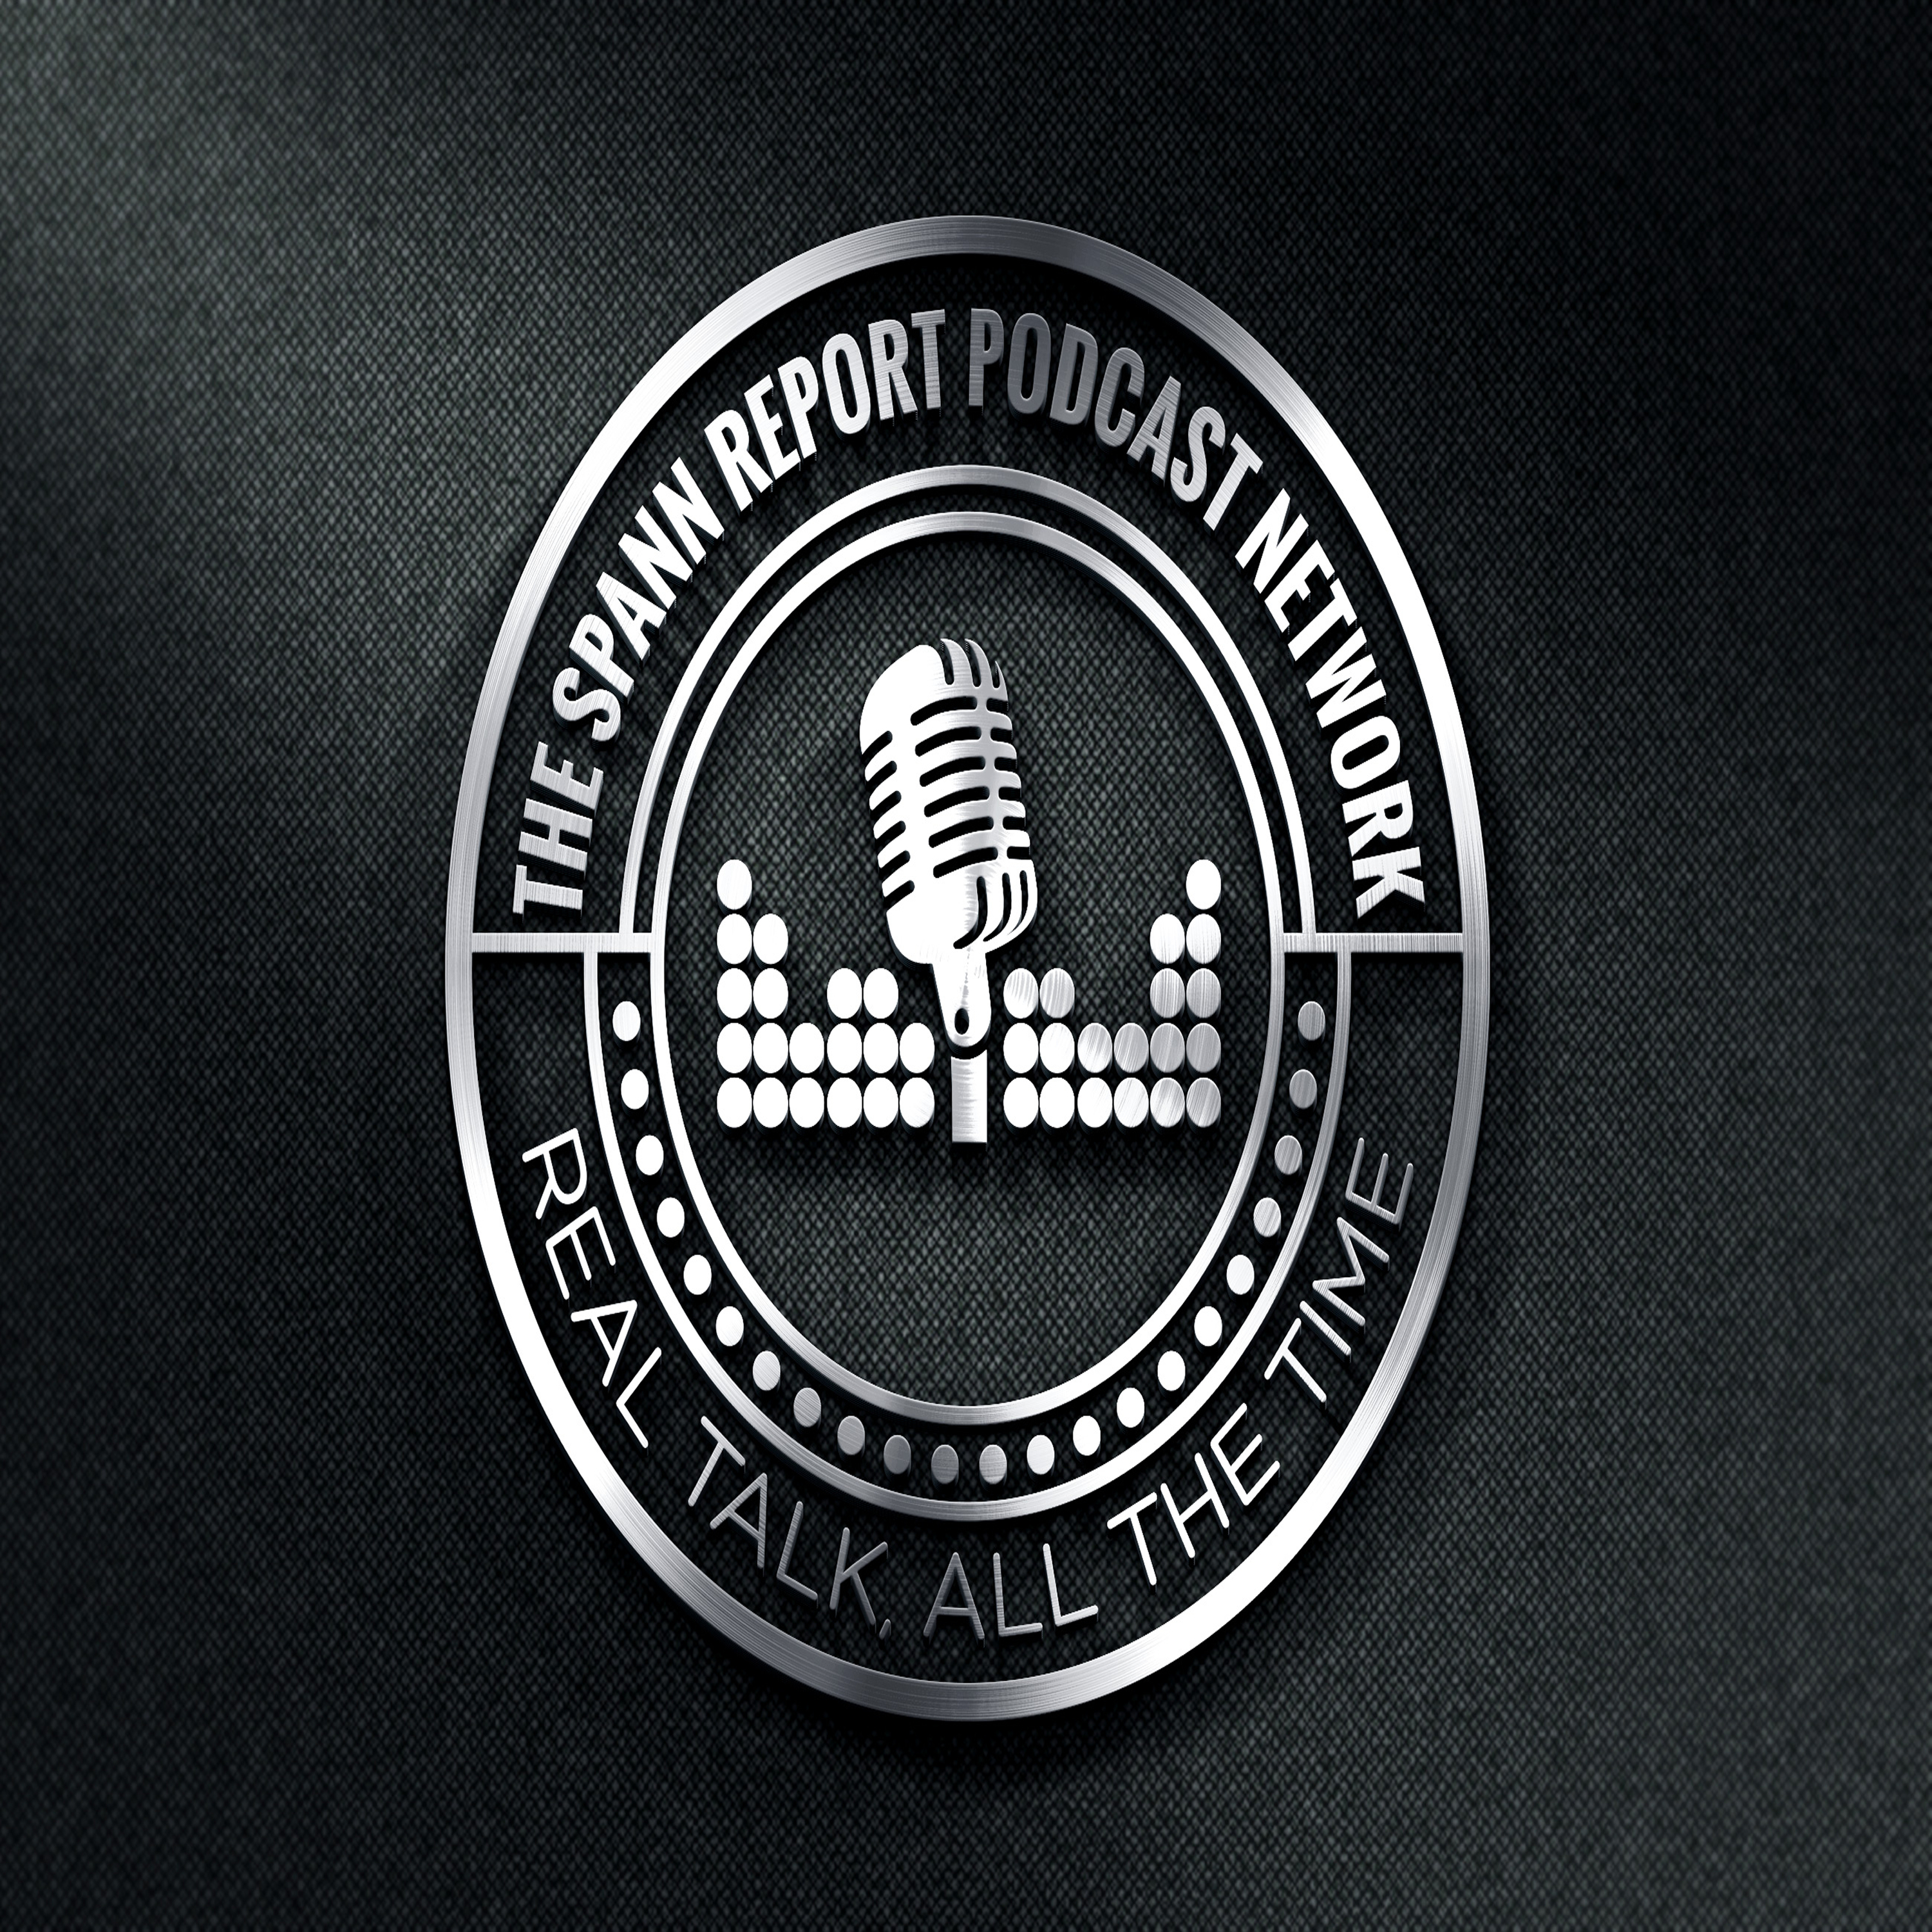 The Spann Report Podcast Network